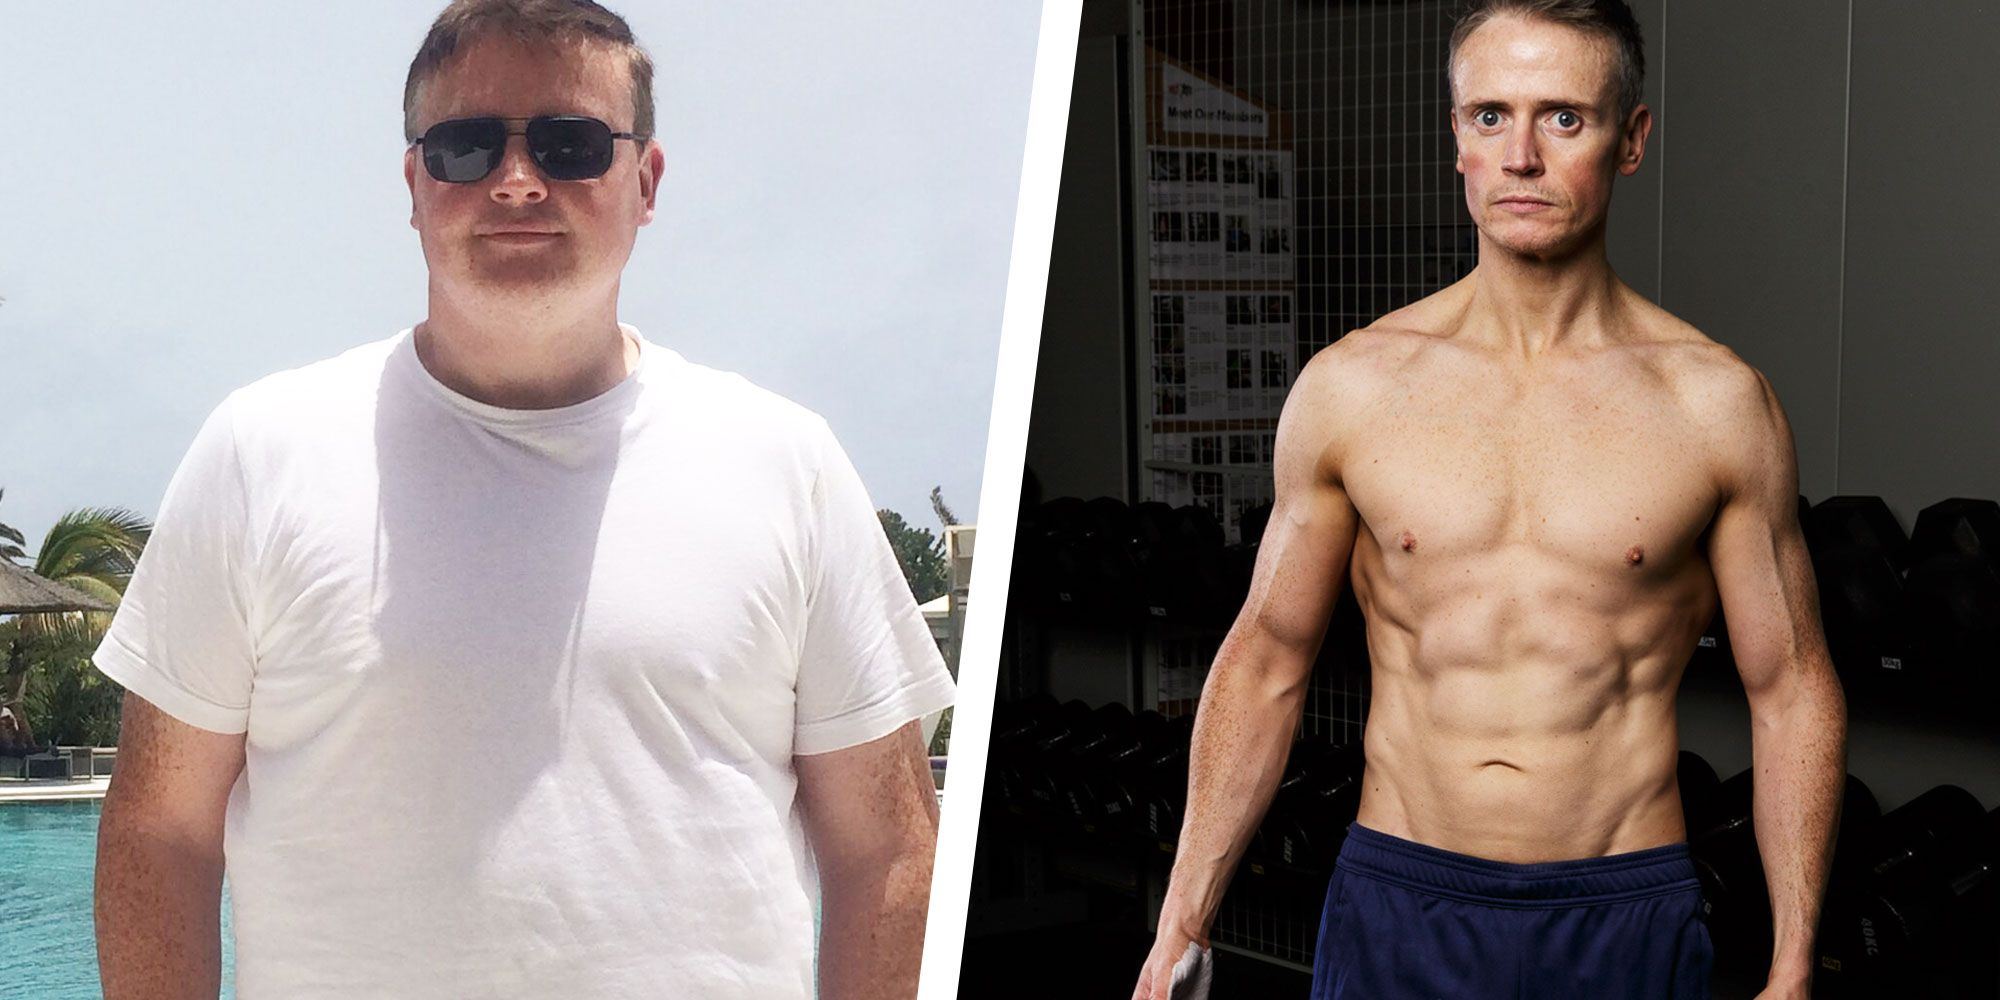 Simple Changes Helped This Guy Lose 70 Pounds and Get Six-Pack Abs